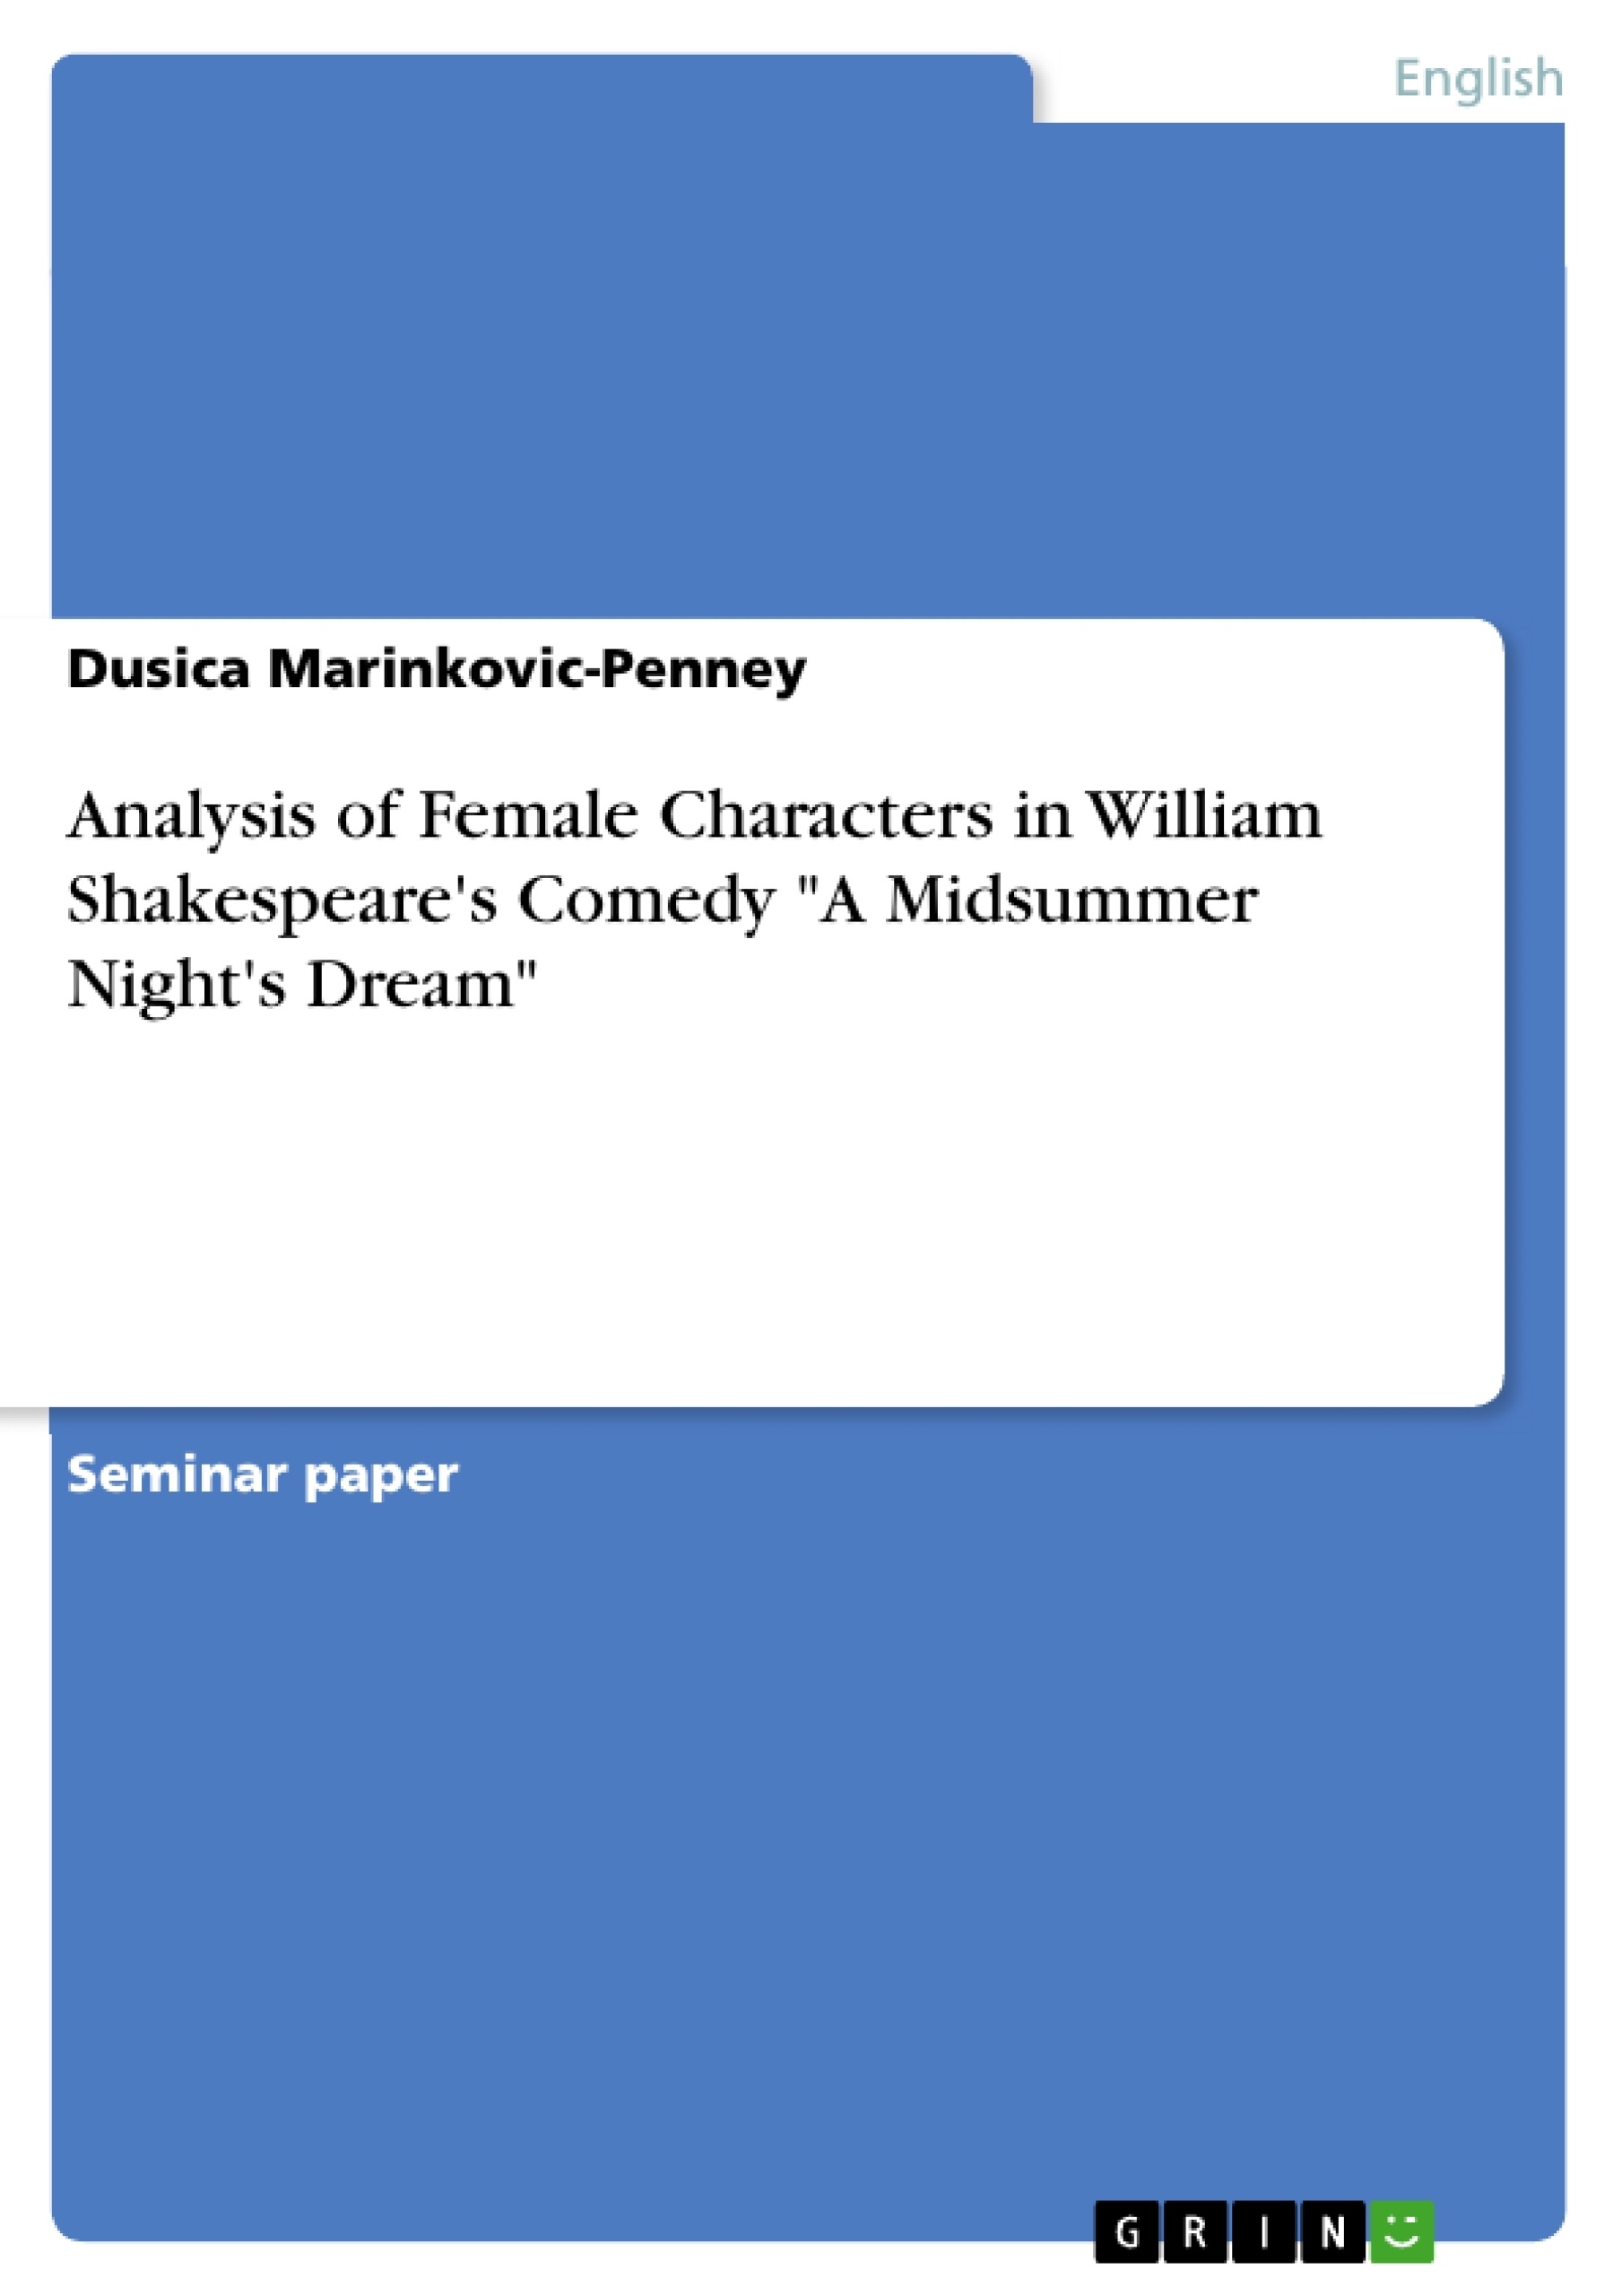 Title: Analysis of Female Characters in William Shakespeare's Comedy "A Midsummer Night's Dream"